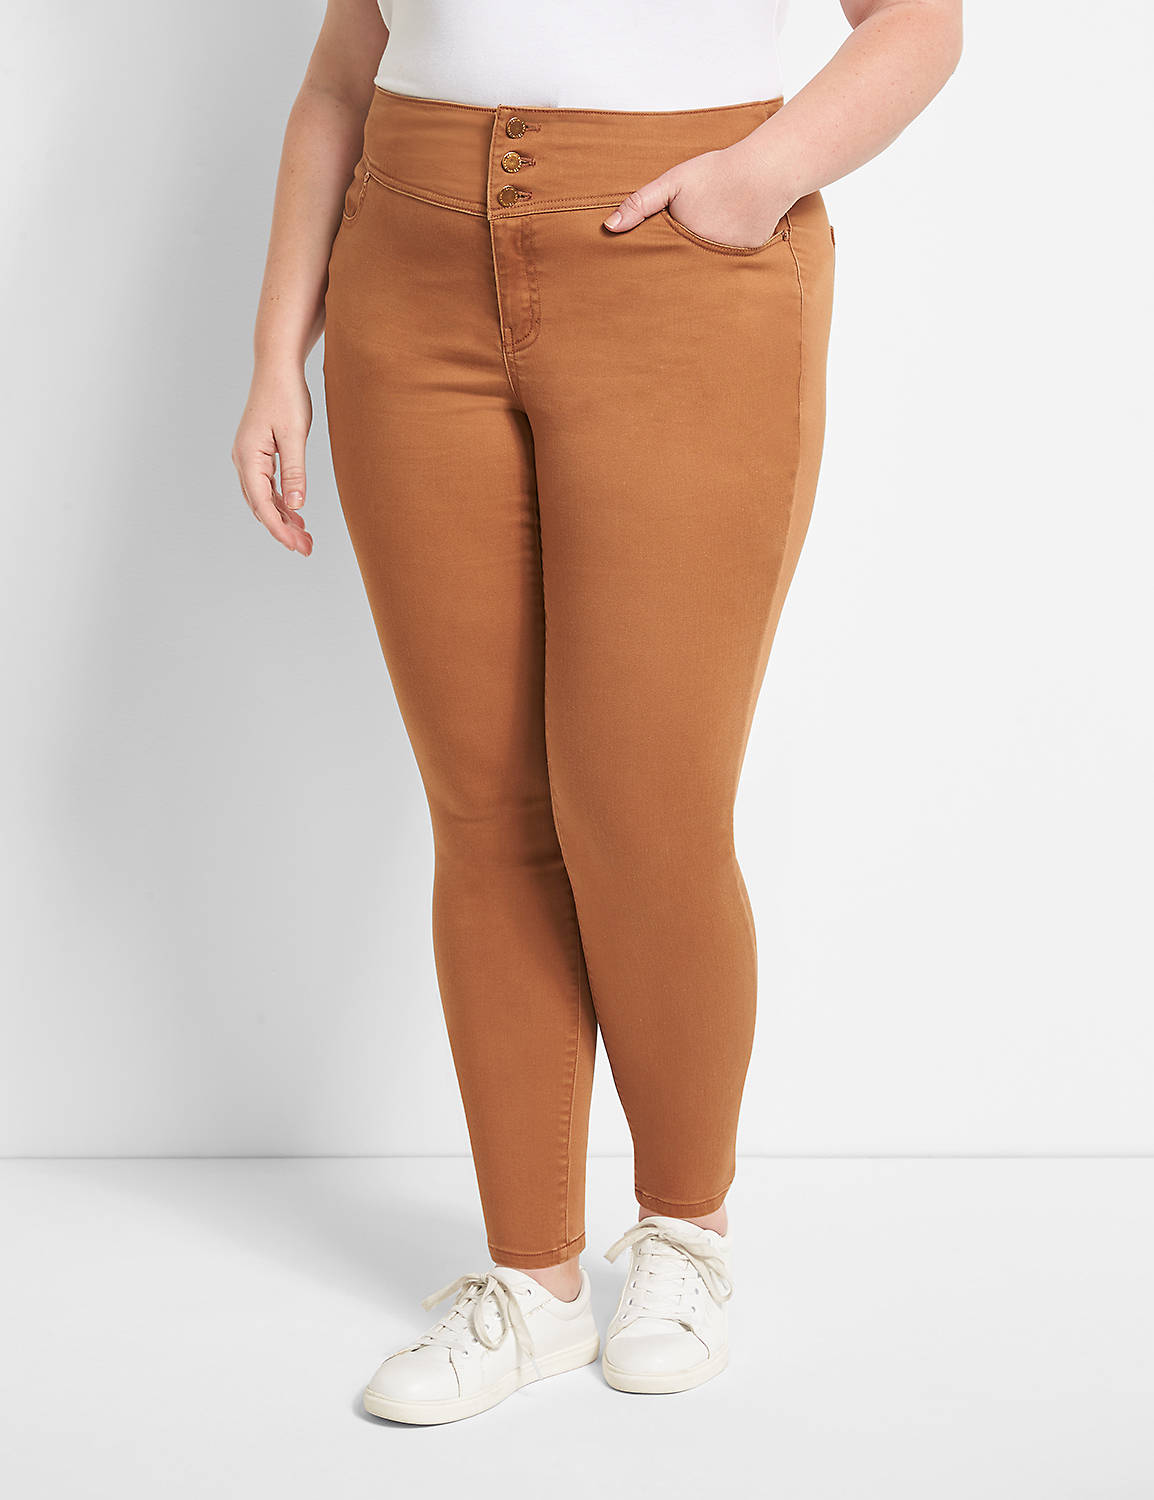 High-Rise 3-Button Sateen Jegging Product Image 1